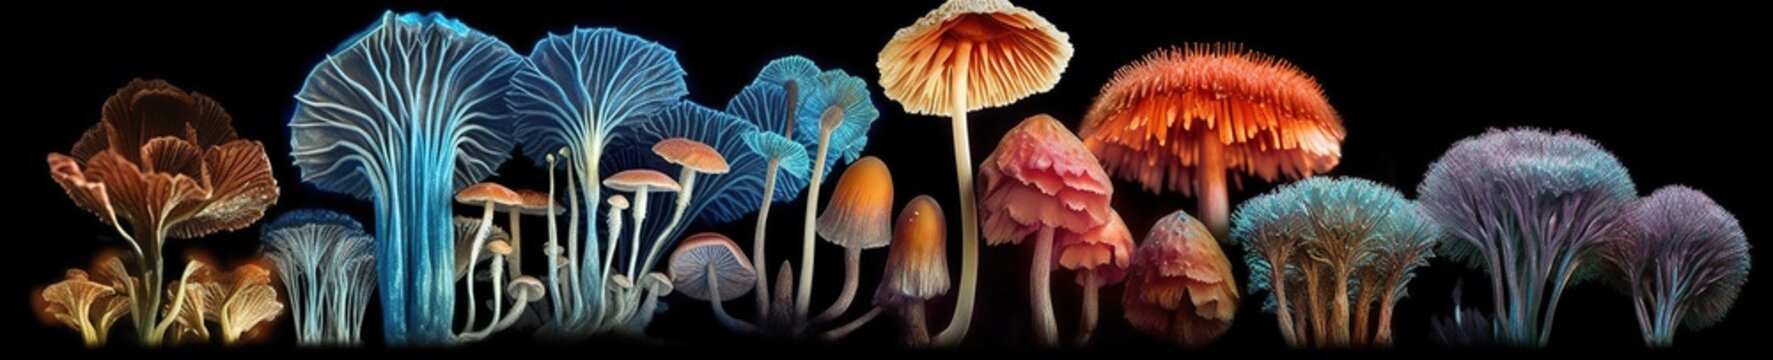 Panoramic banner, various mushroom species, every size and color in a row, vivid colors, AI generative panorama illustration on black background